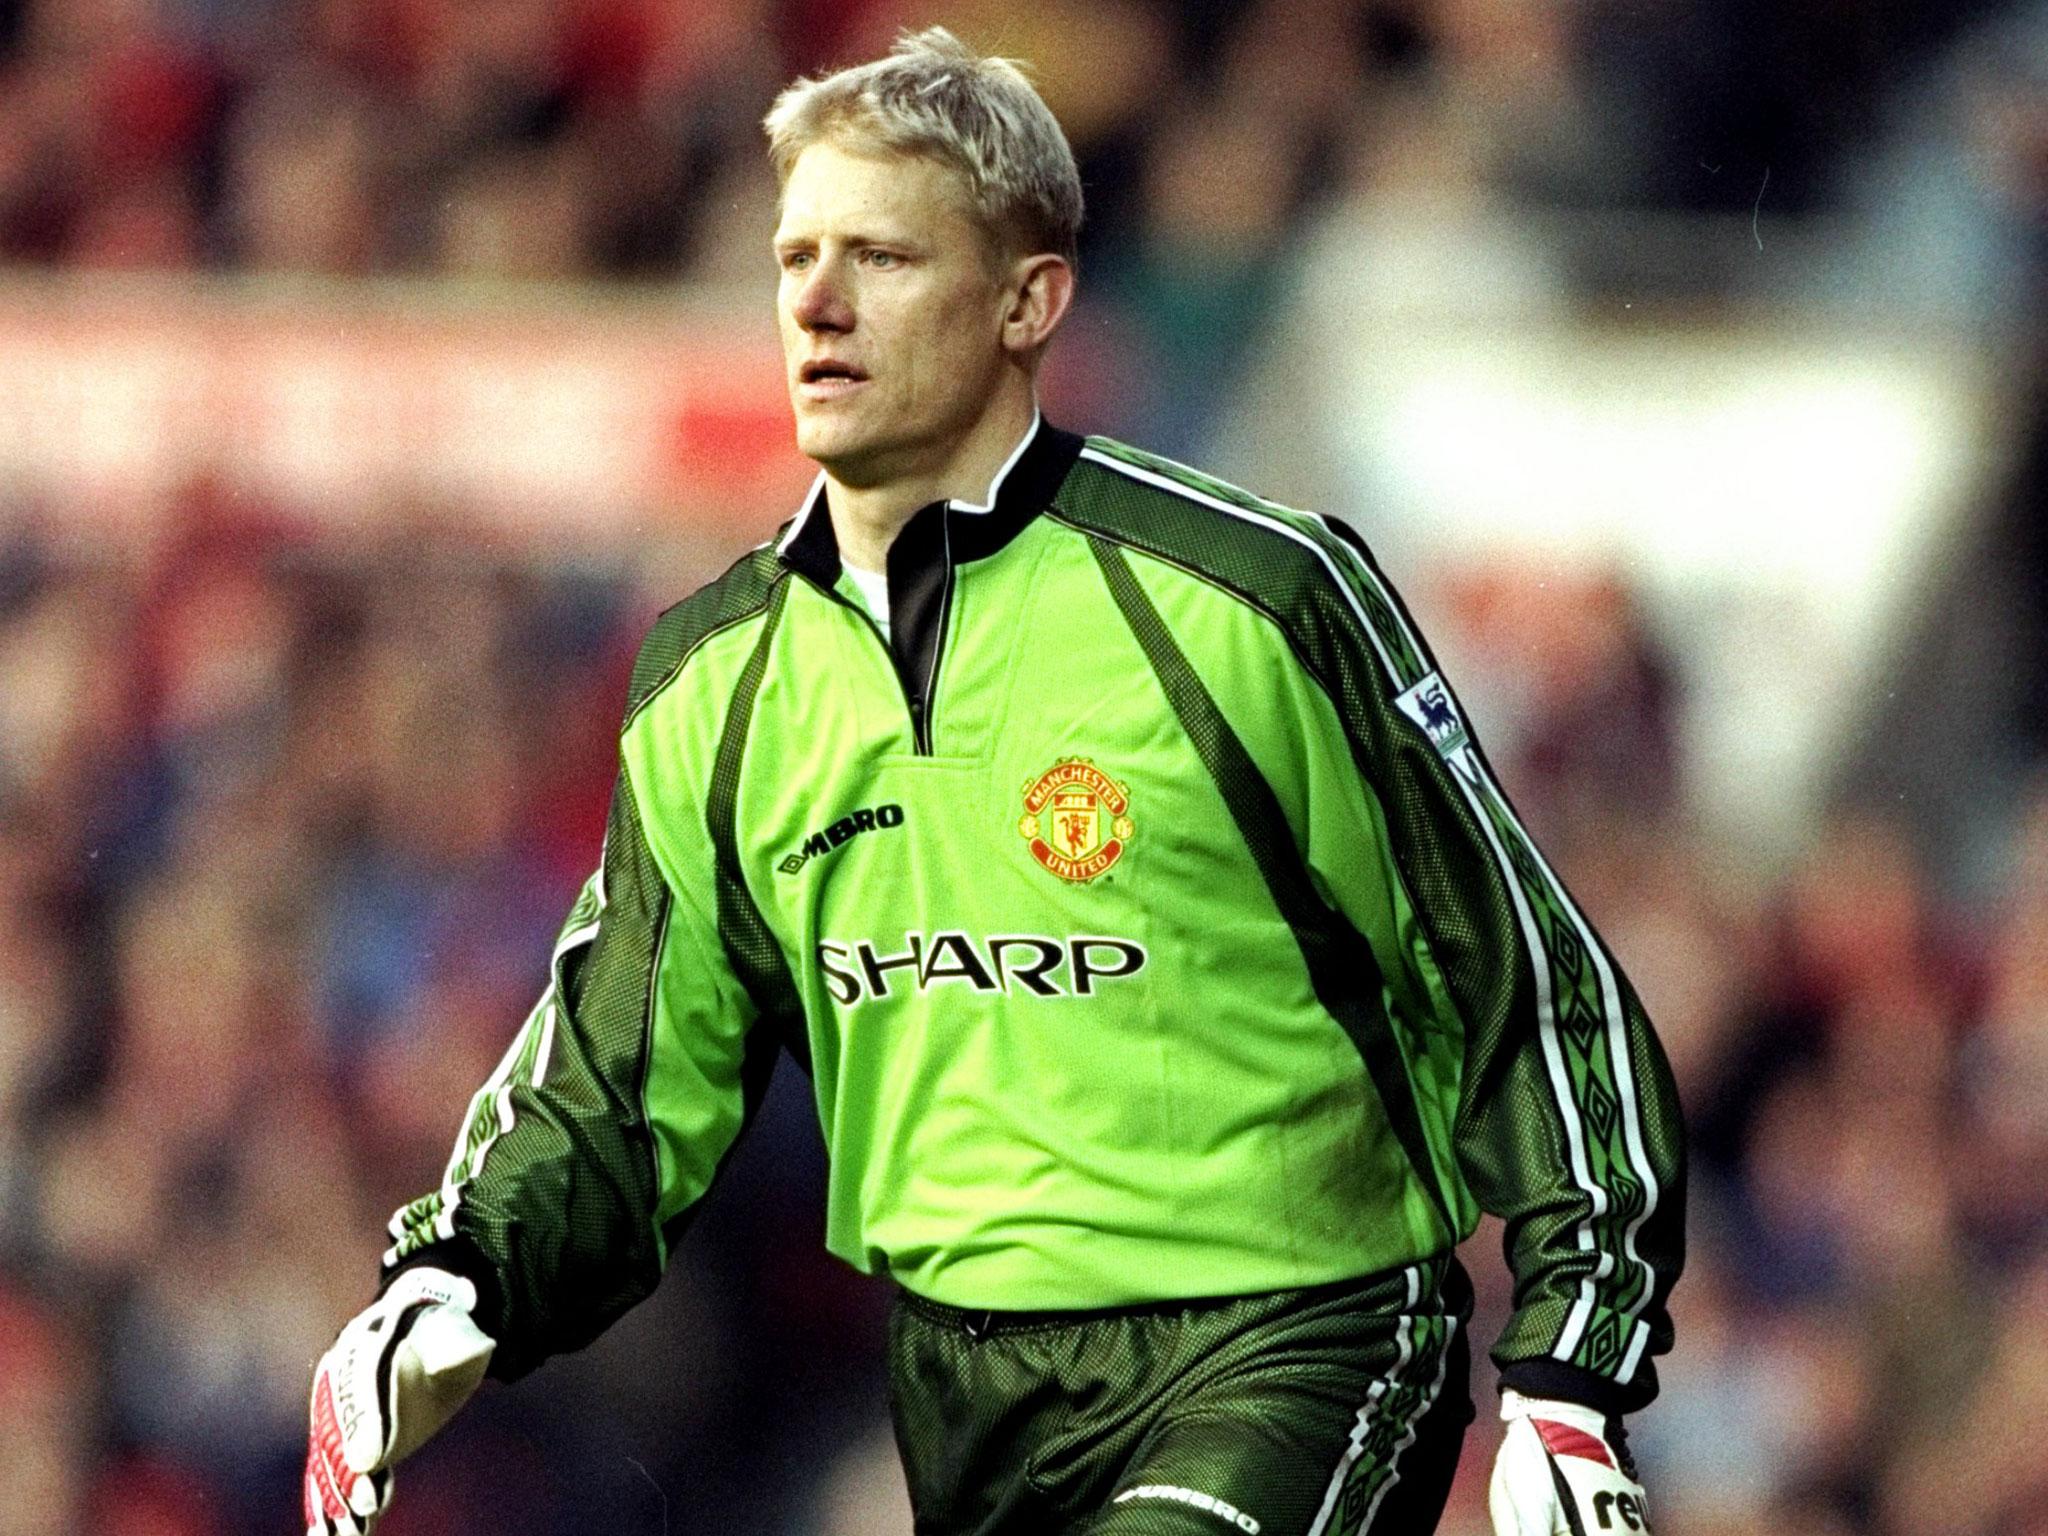 Peter Schmeichel news, breaking stories and comment